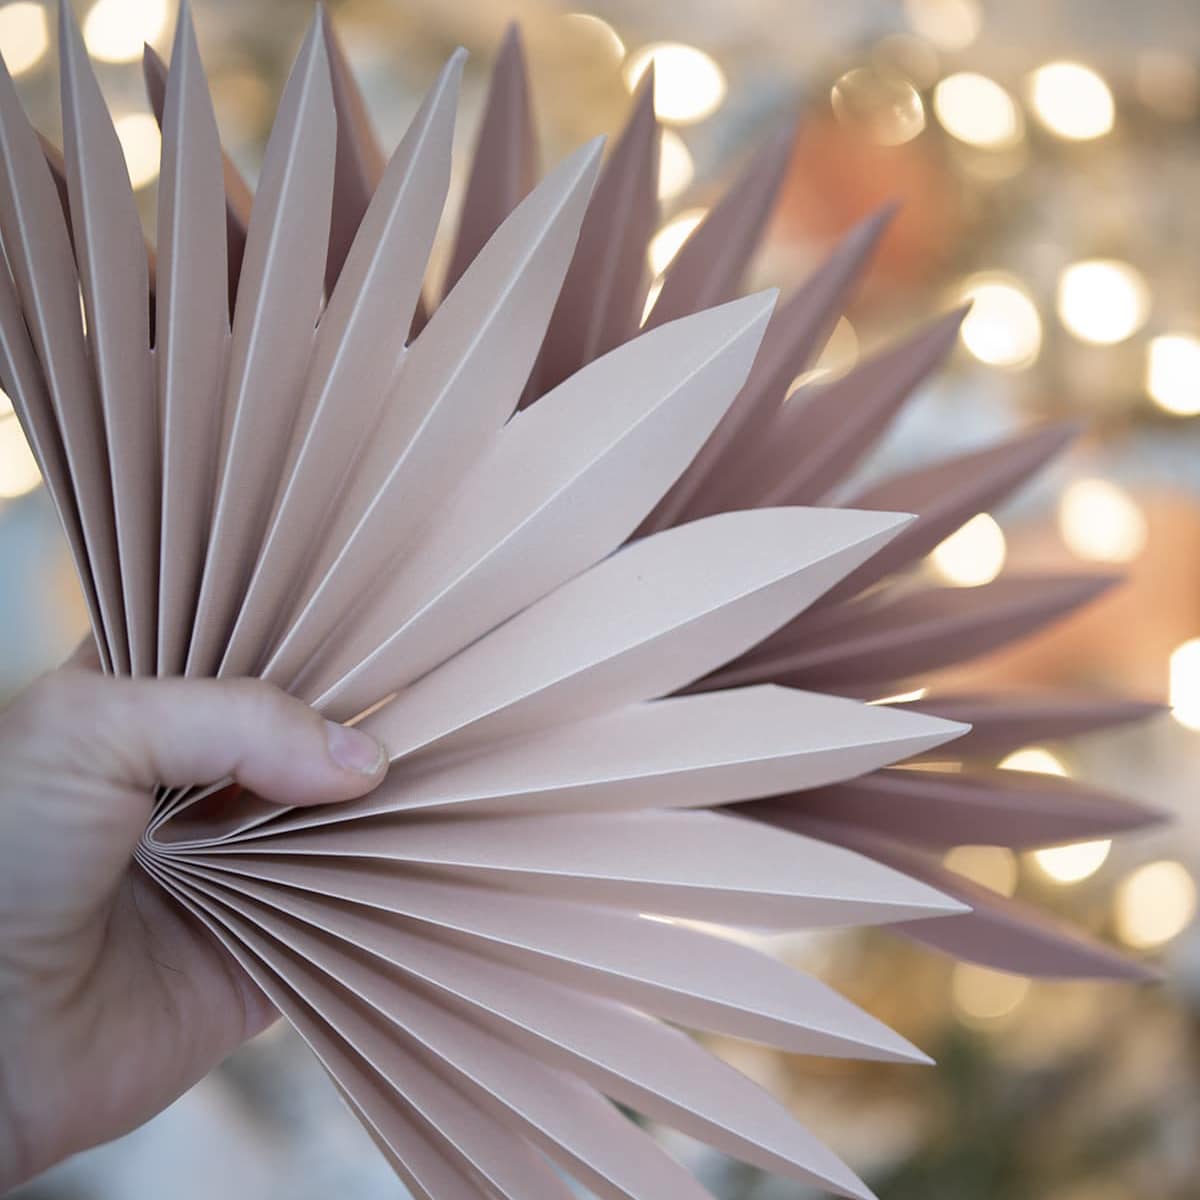 Easy and affordable paper fan decorations inspired by faux sun palm leaves